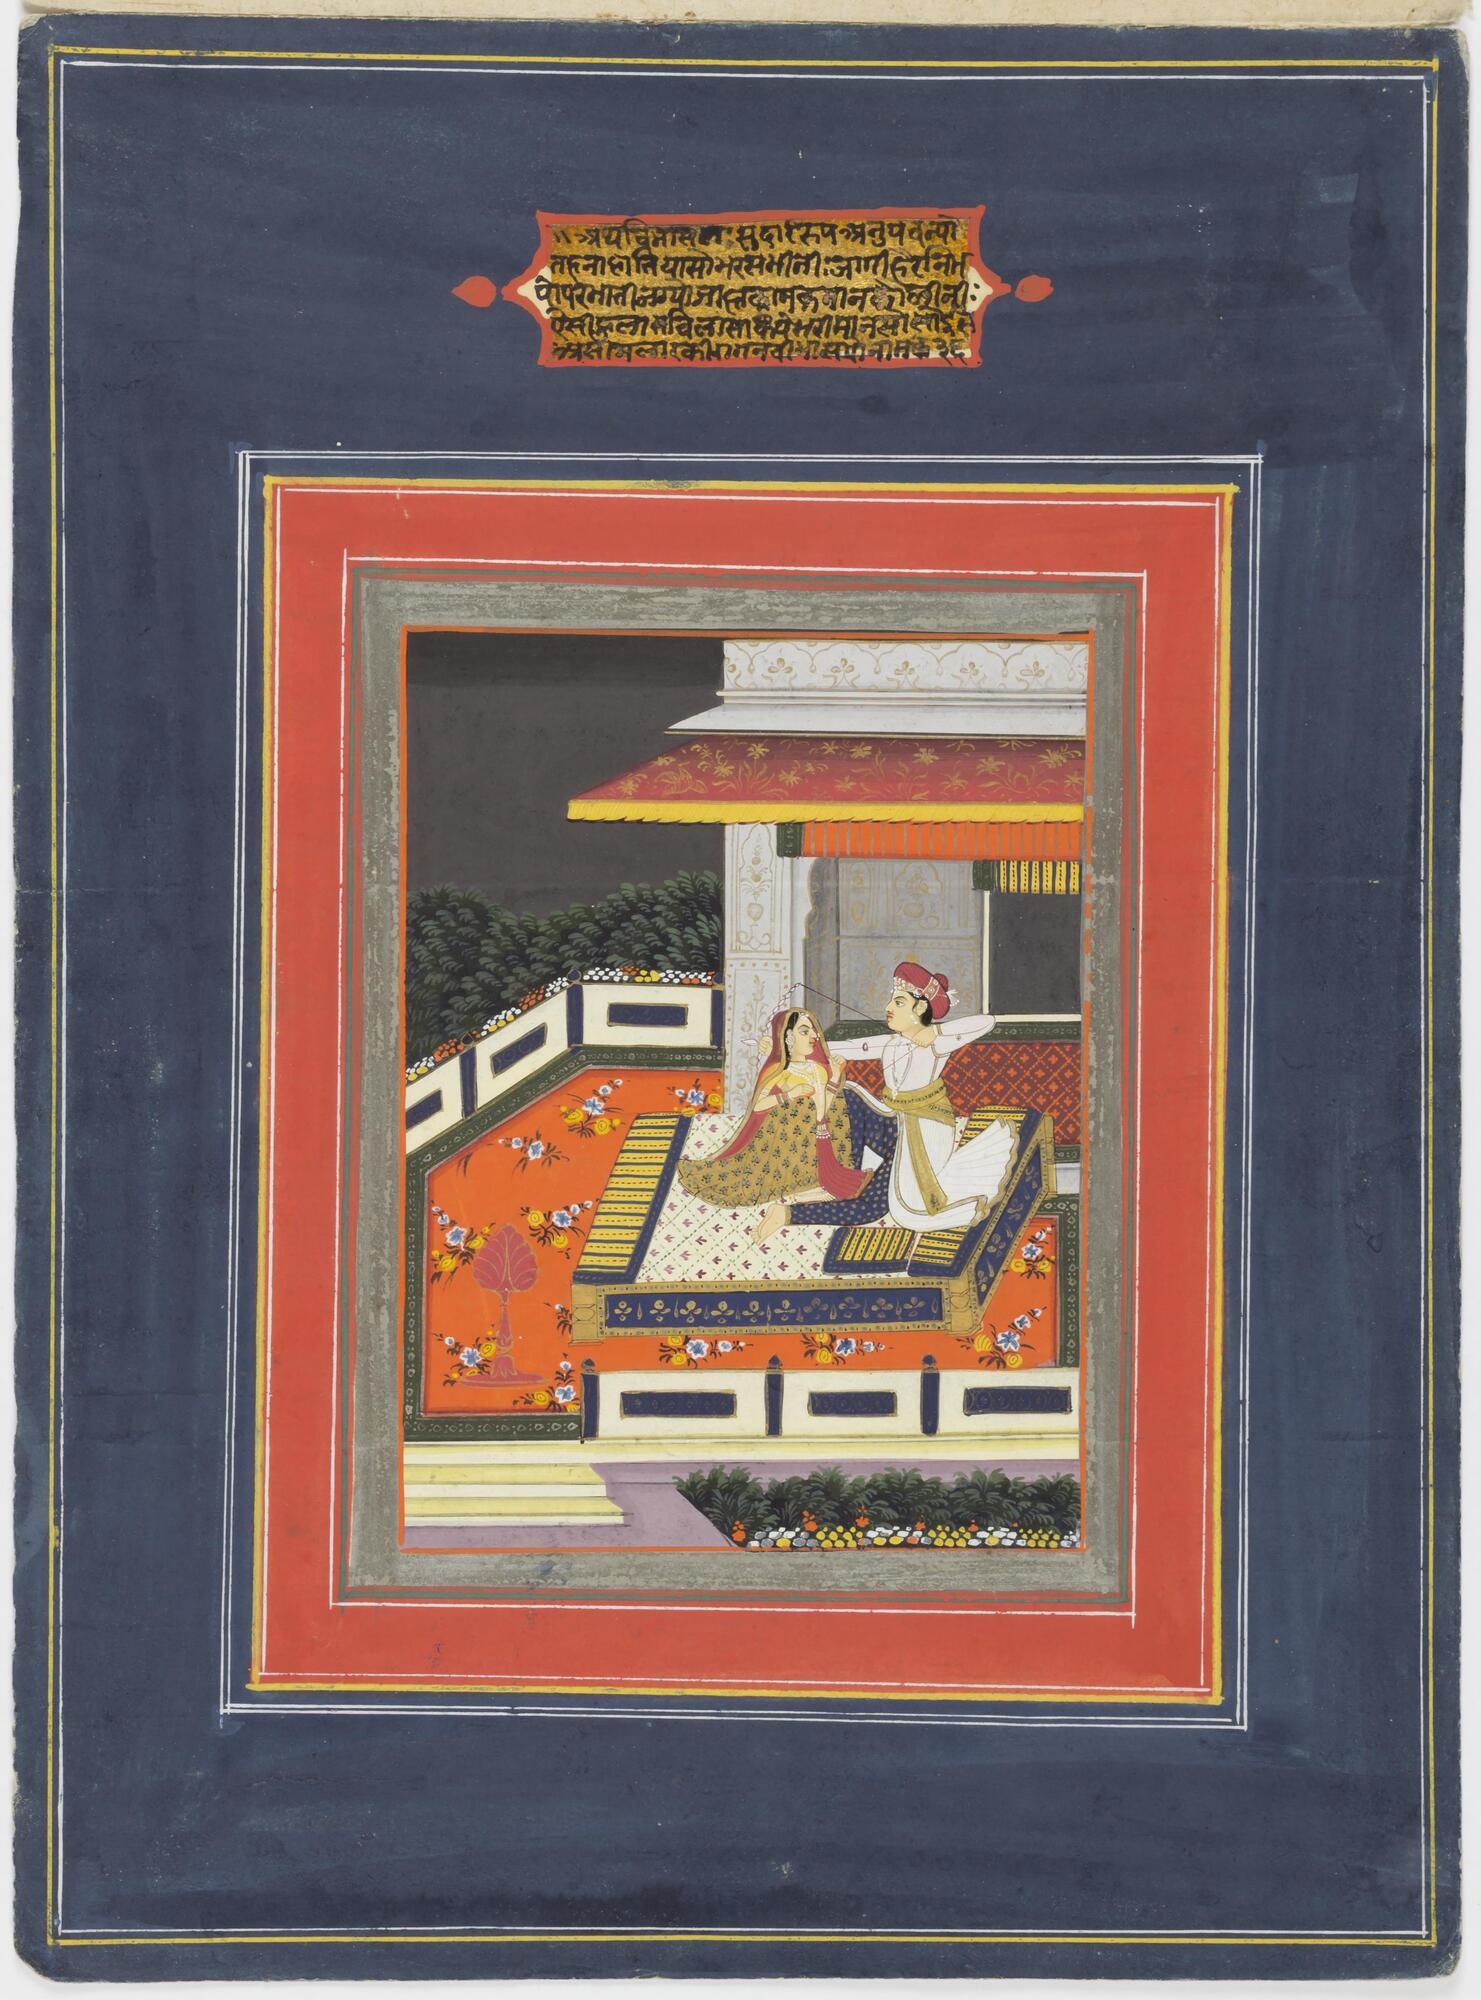 One male and one female figure are seated on a low-rise bed, in an open terrace. The male draws his bow. A pavilion is represented in the background. It is nighttime. A short verse is painted above the depicted scene. The colors are bright.